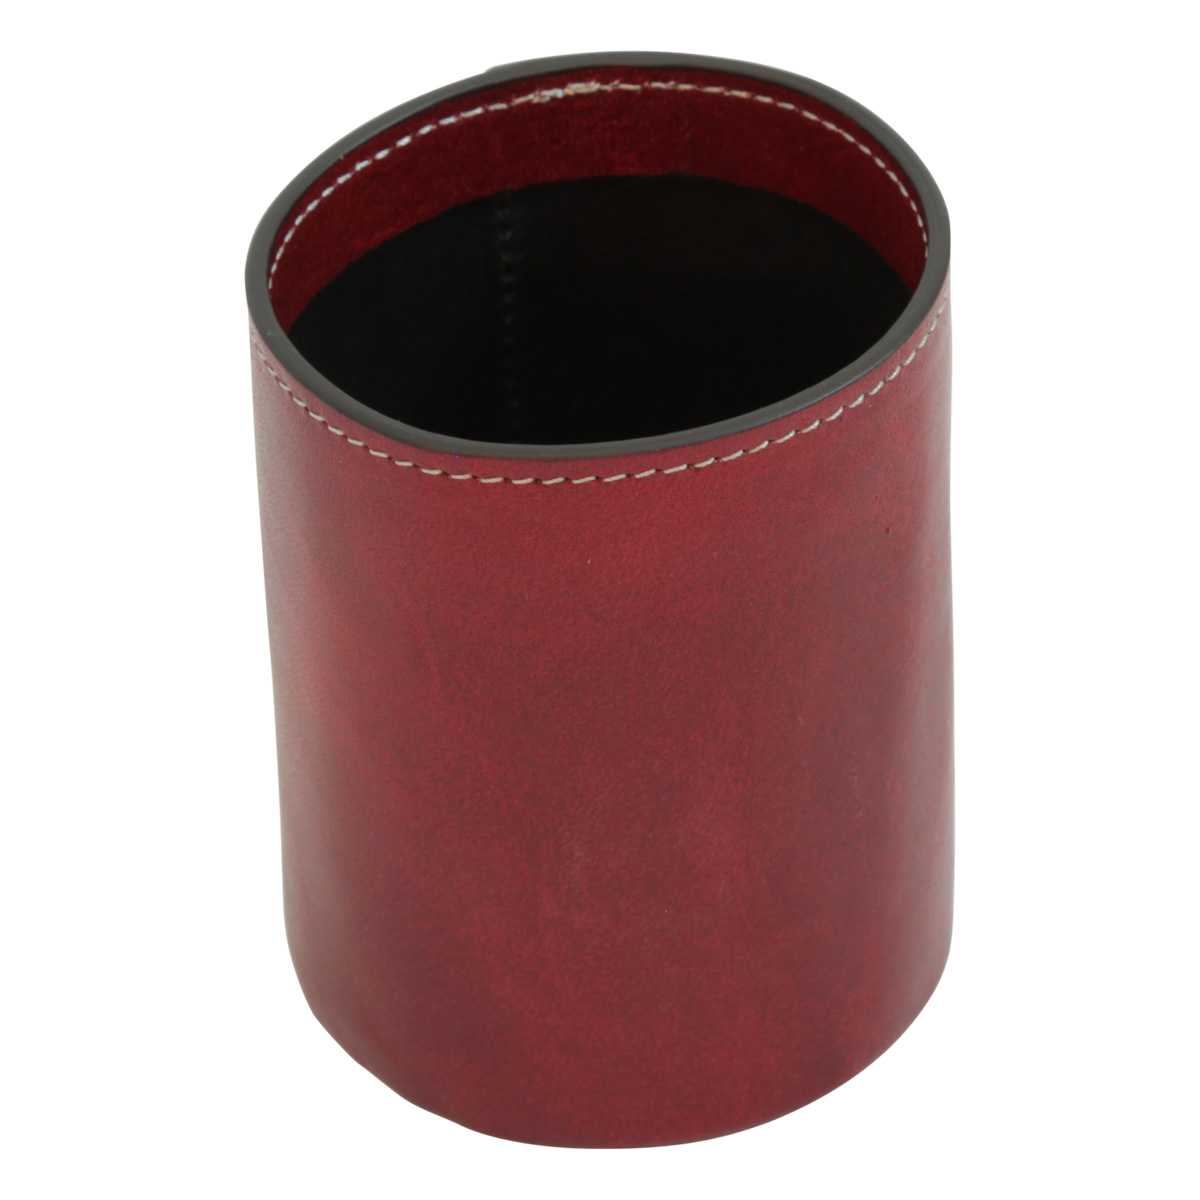 Leather pen cup - red | 763089RO UK | Old Angler Firenze